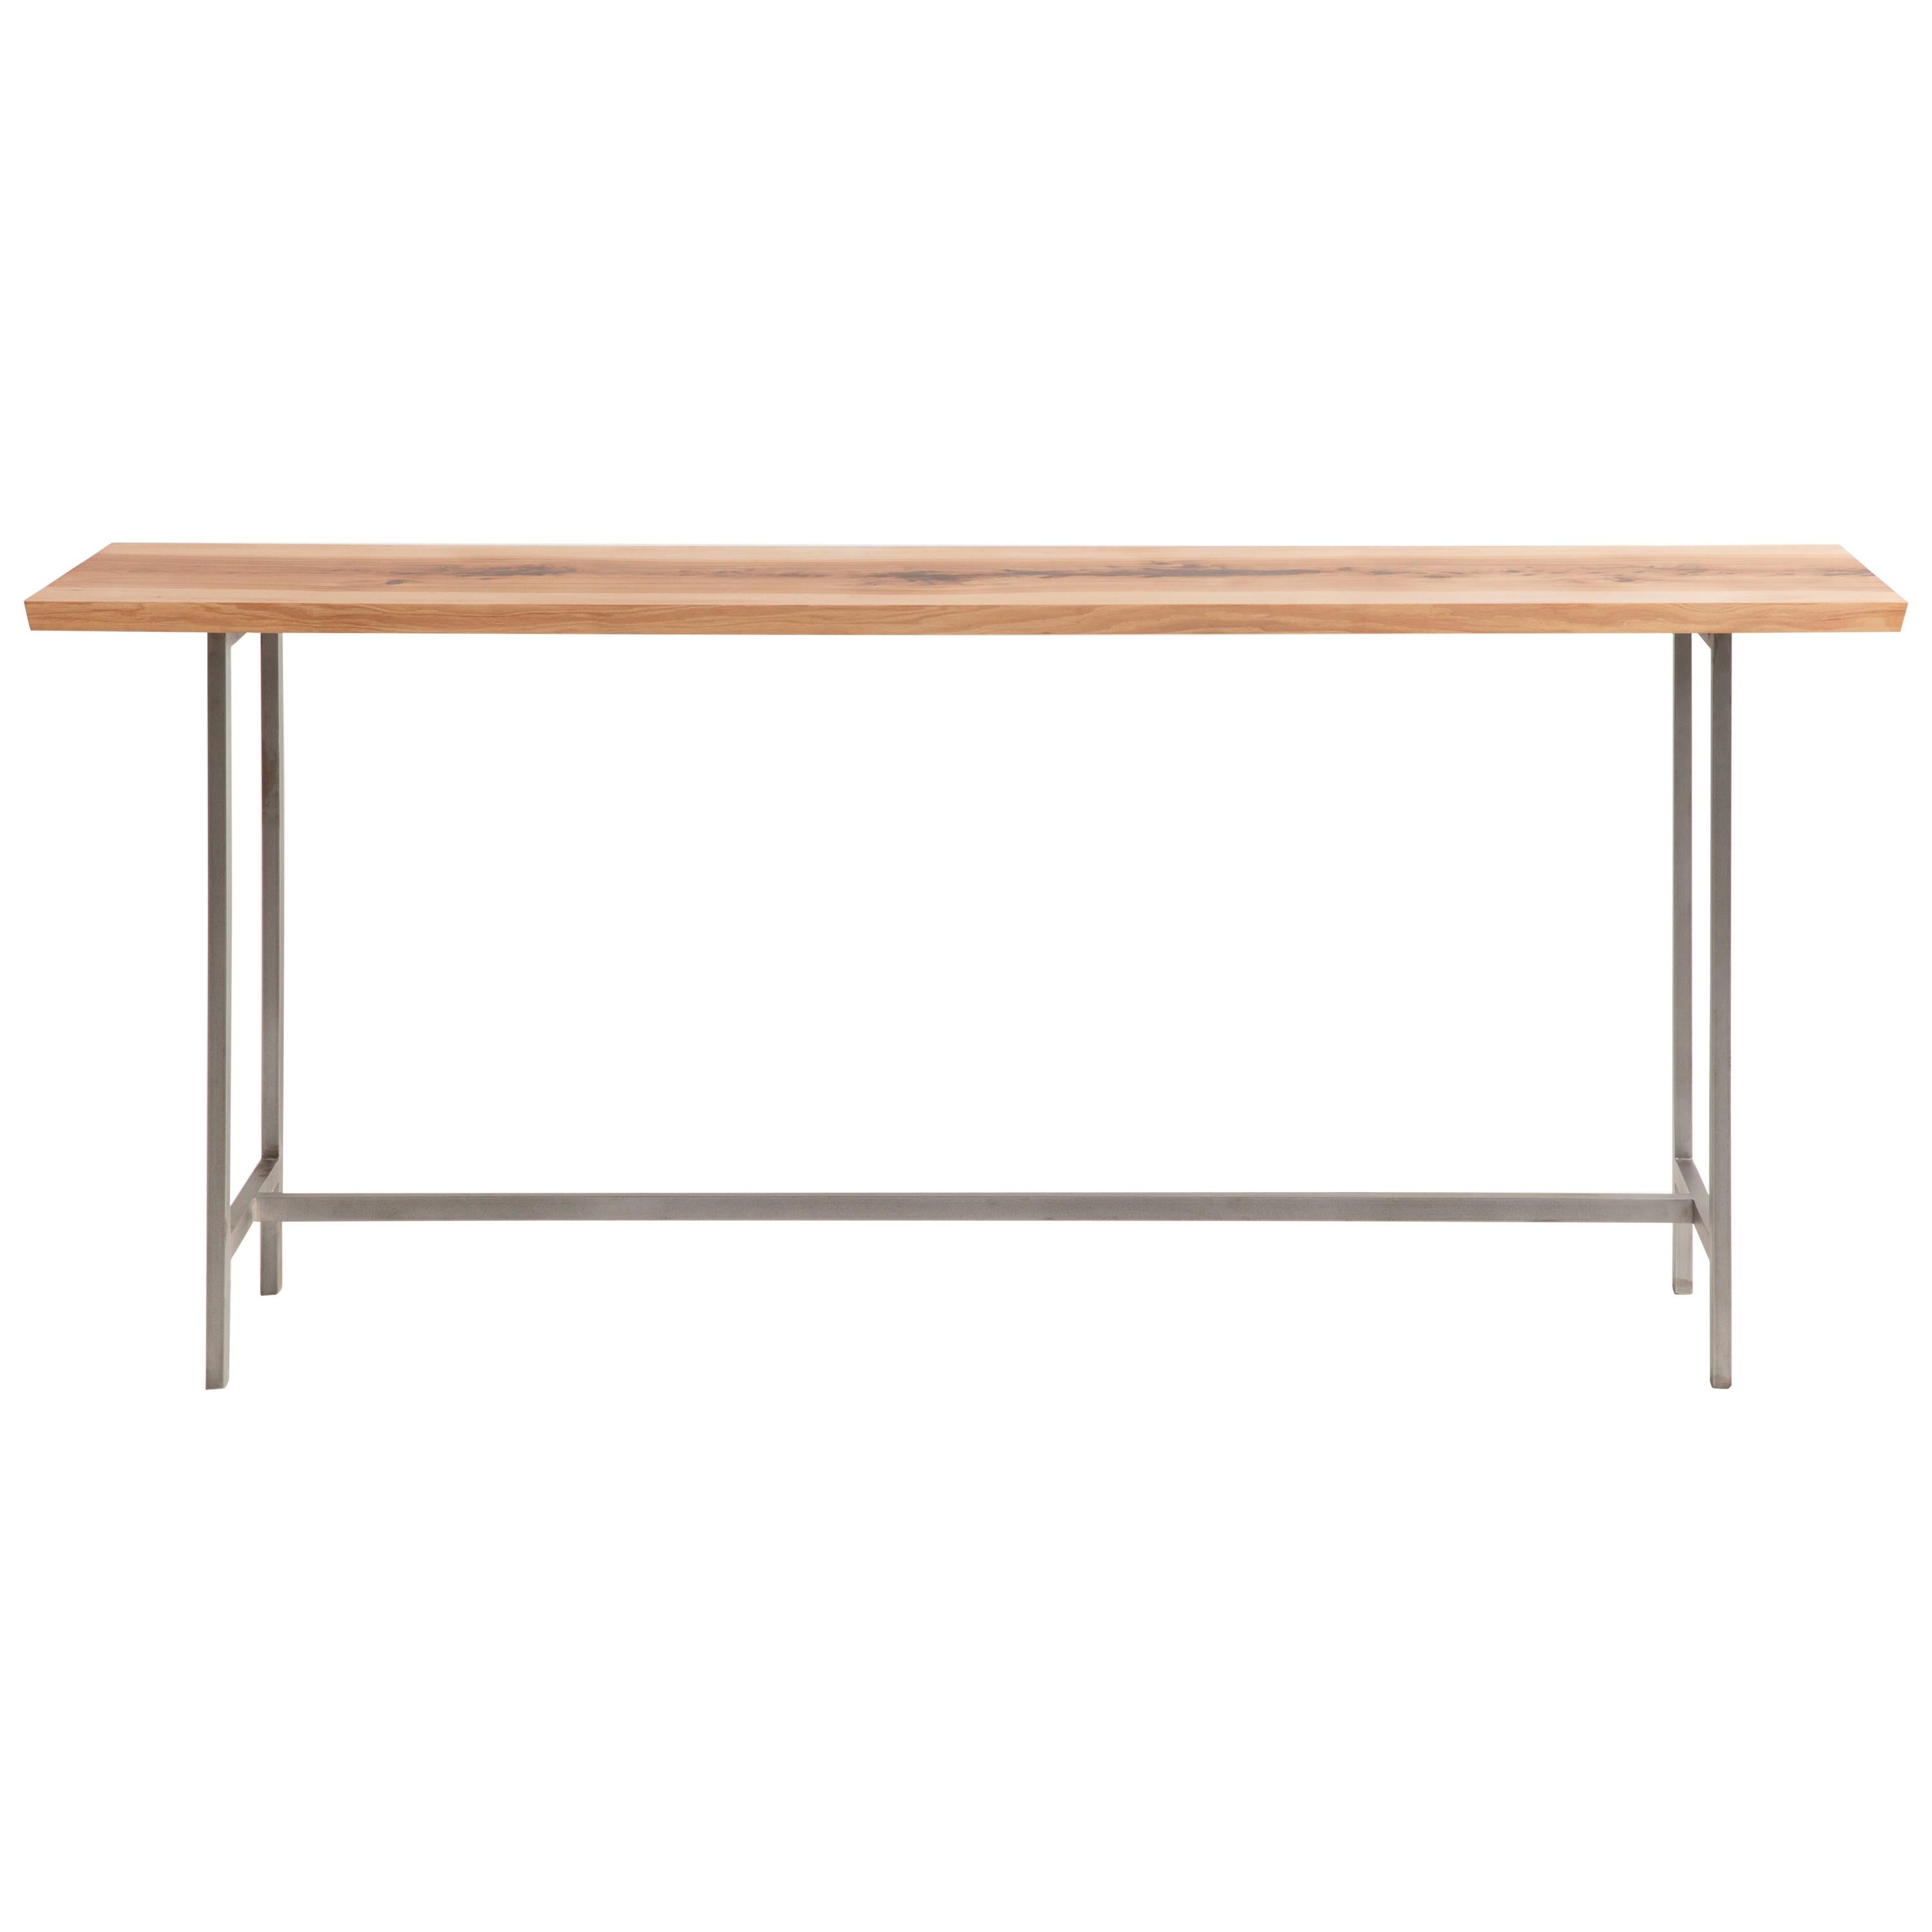 Narrow Console Table in Solid Wood and Modern Steel Base by Alabama Sawyer